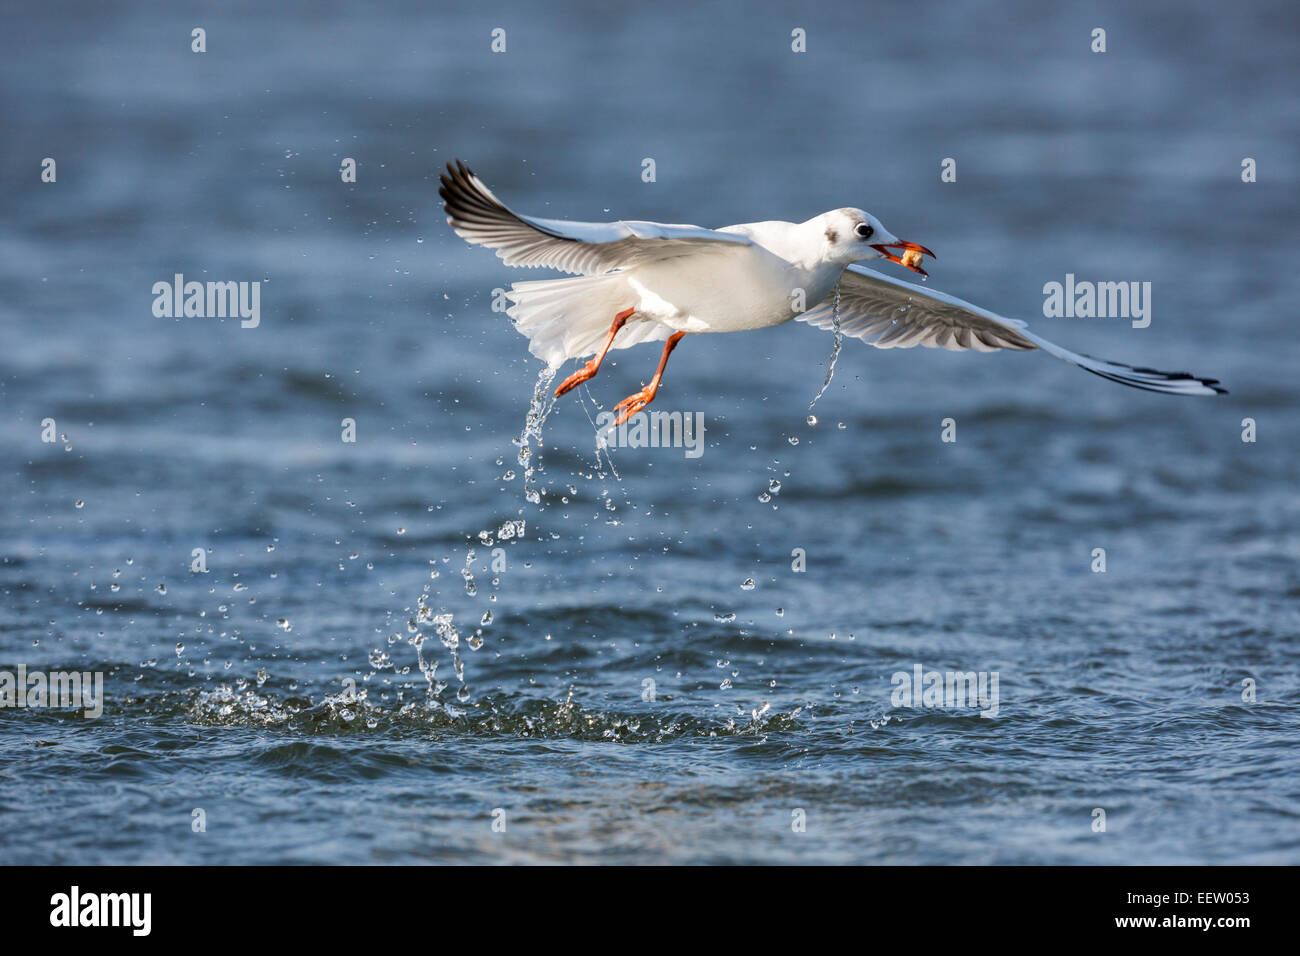 Black-headed Gull Chroicocephalus ridibundus flying after catching item from surface of water with splash Stock Photo